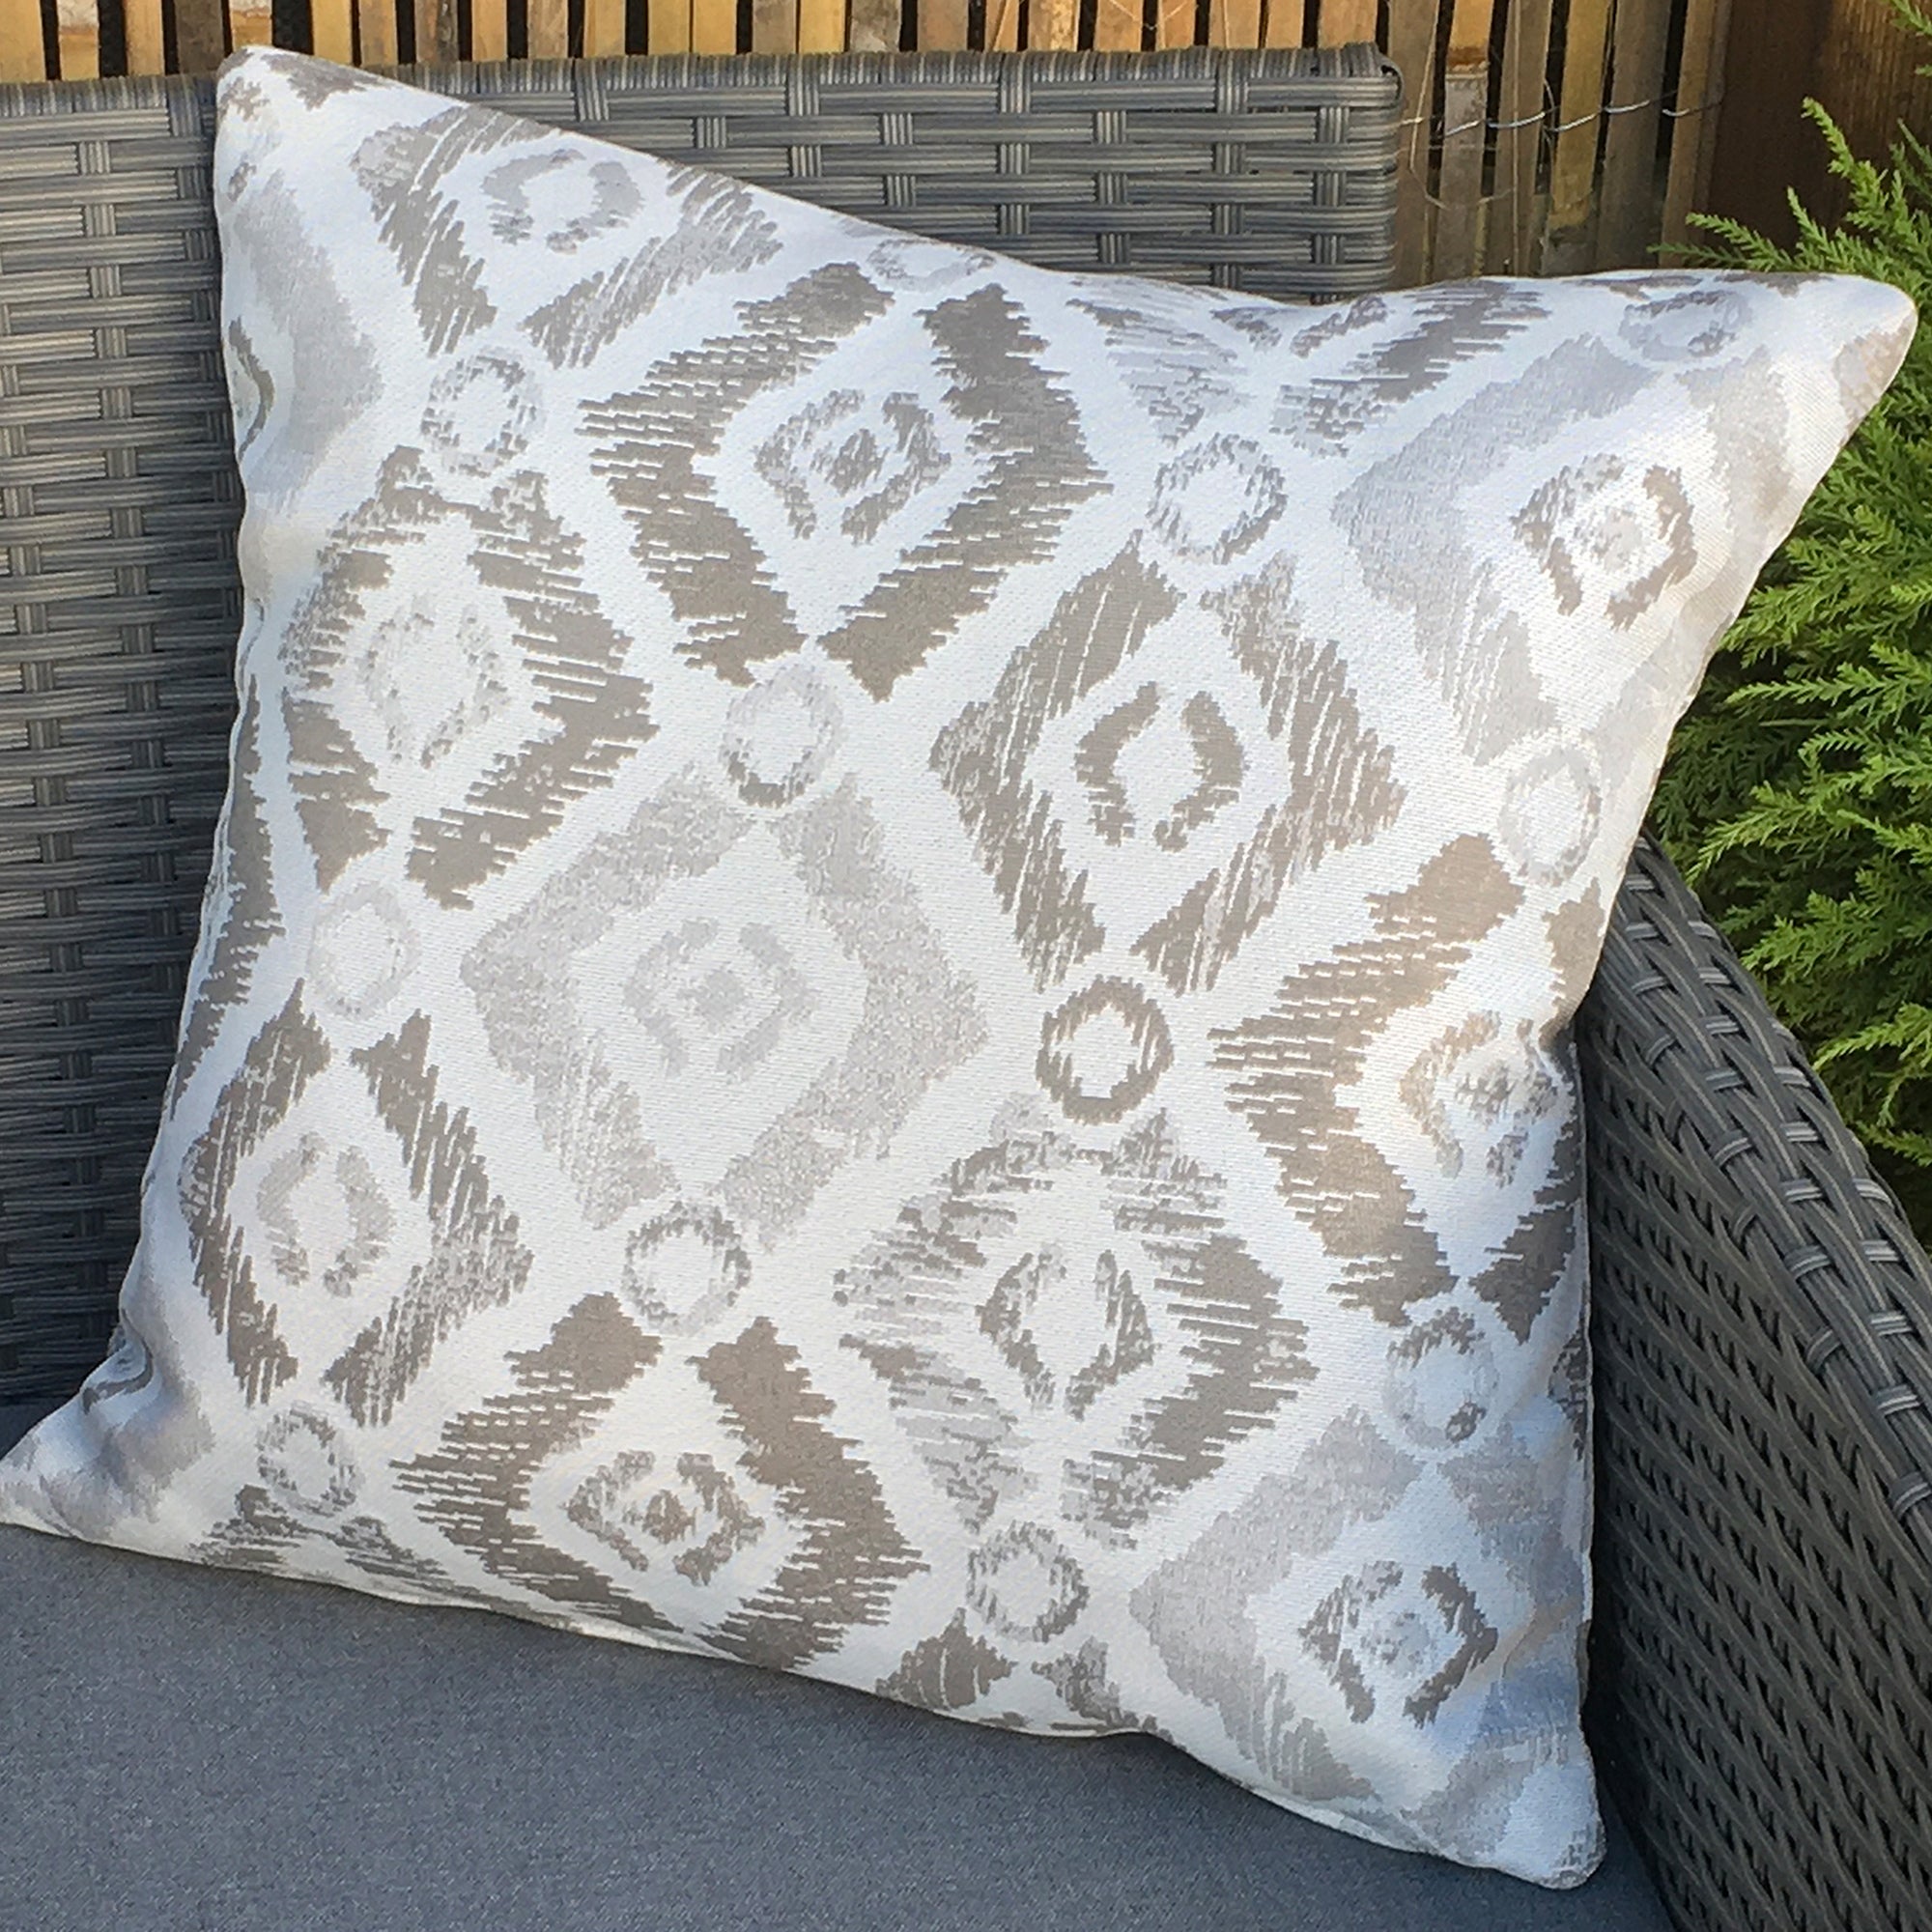 Set of 2 Patterned Scatter Outdoor Cushions